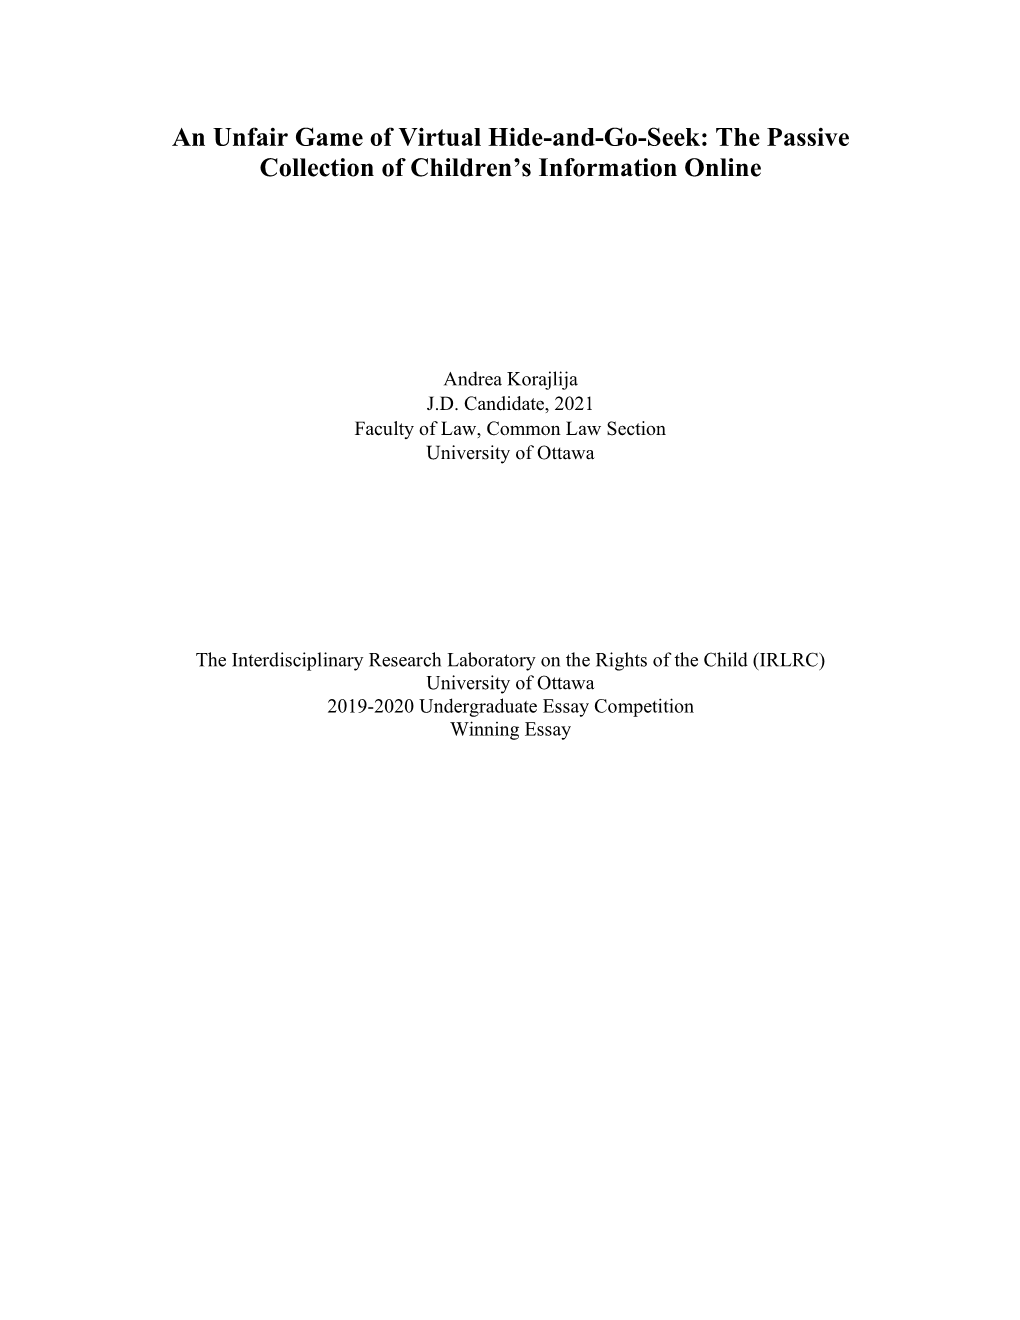 The Passive Collection of Children's Information Online